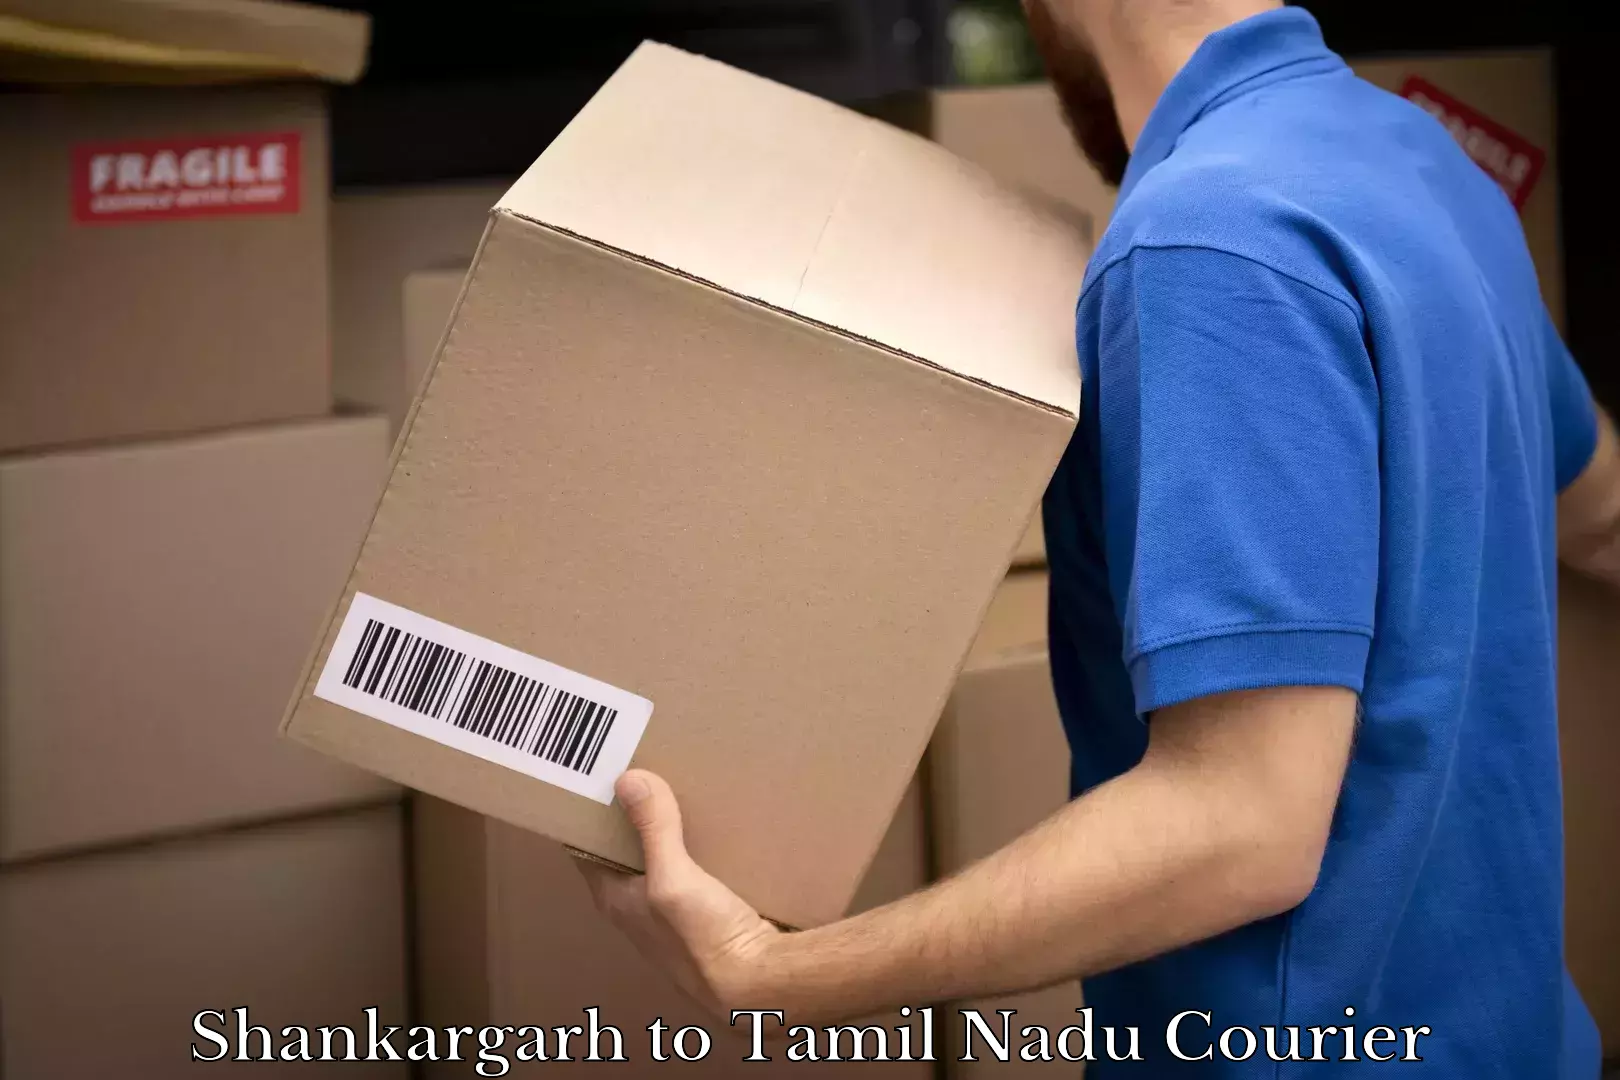 Reliable delivery network Shankargarh to Tamil Nadu